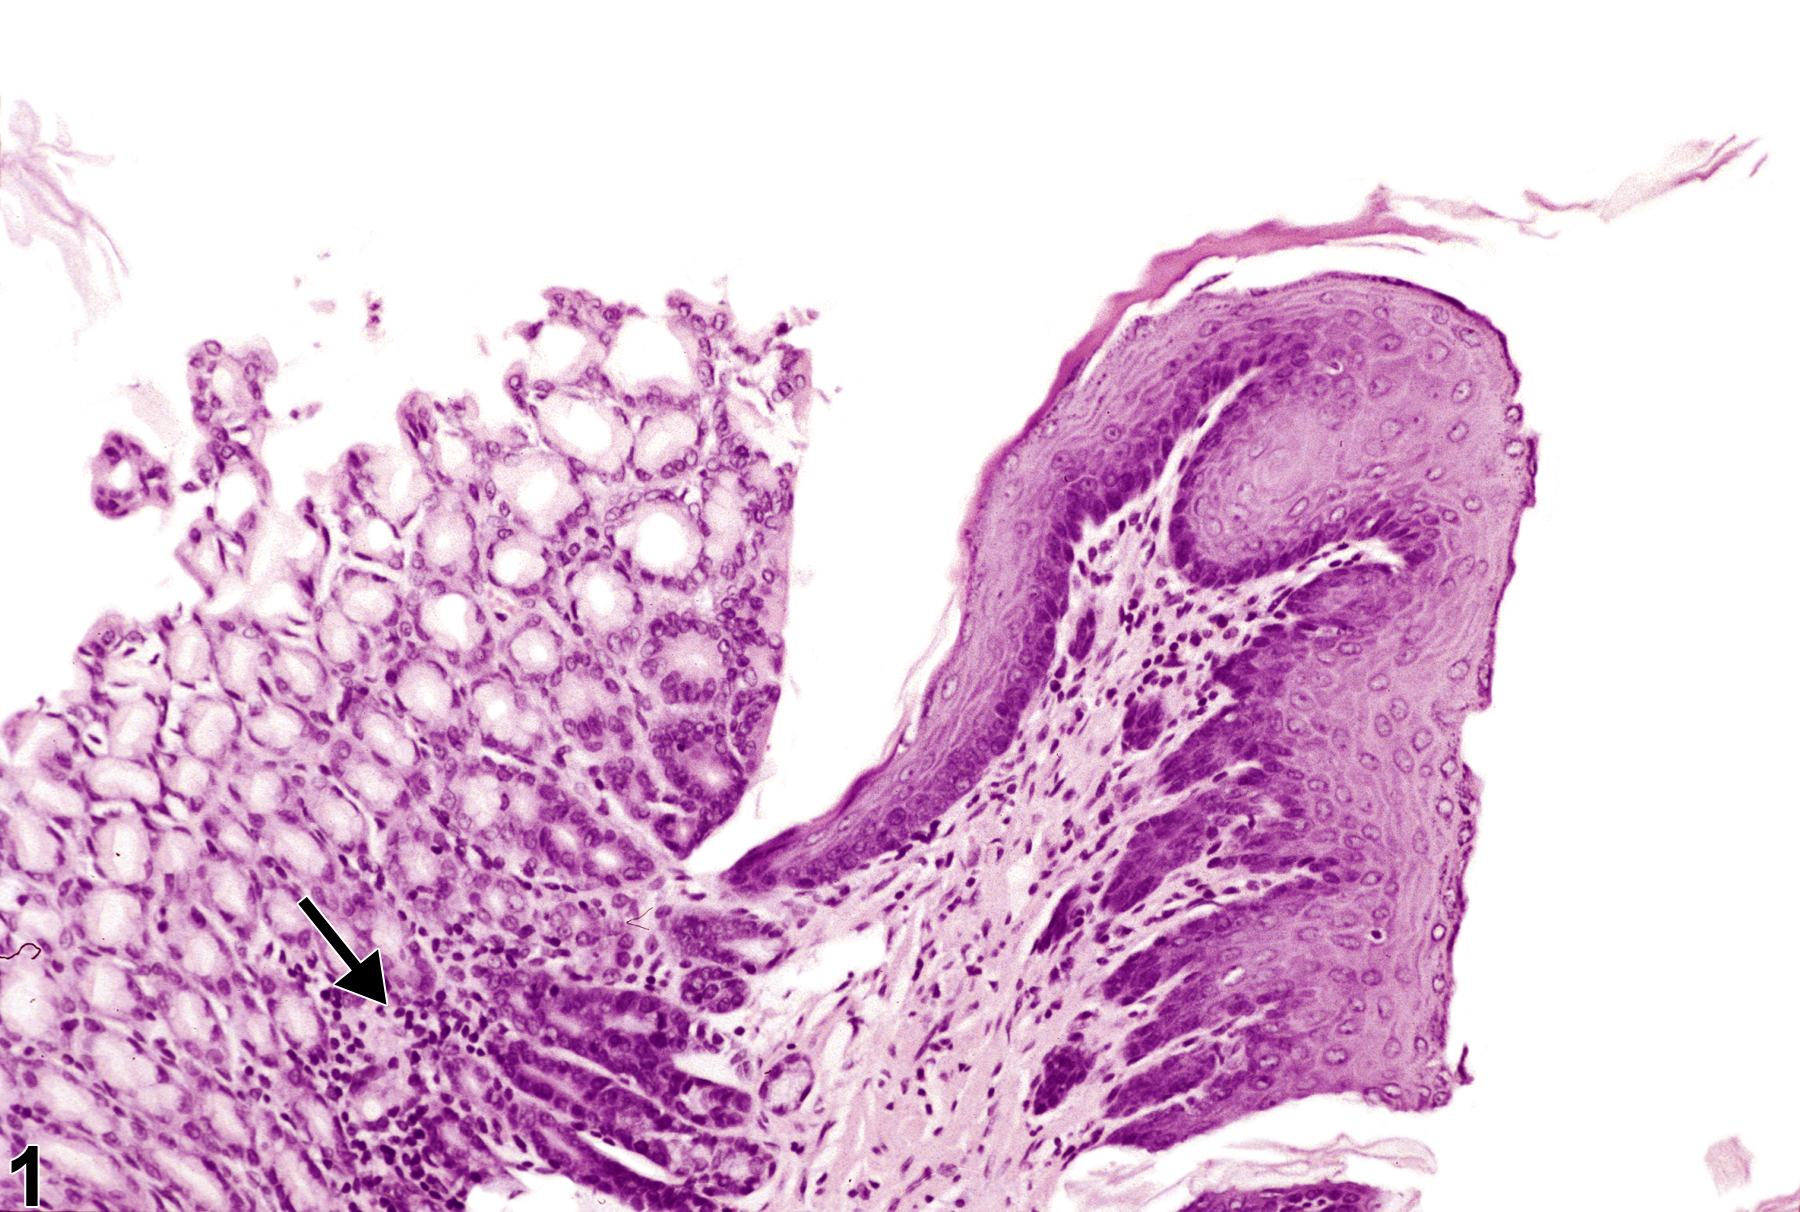 Image of infiltration cellular  in the glandular stomach from a male F344/N rat in a chronic study